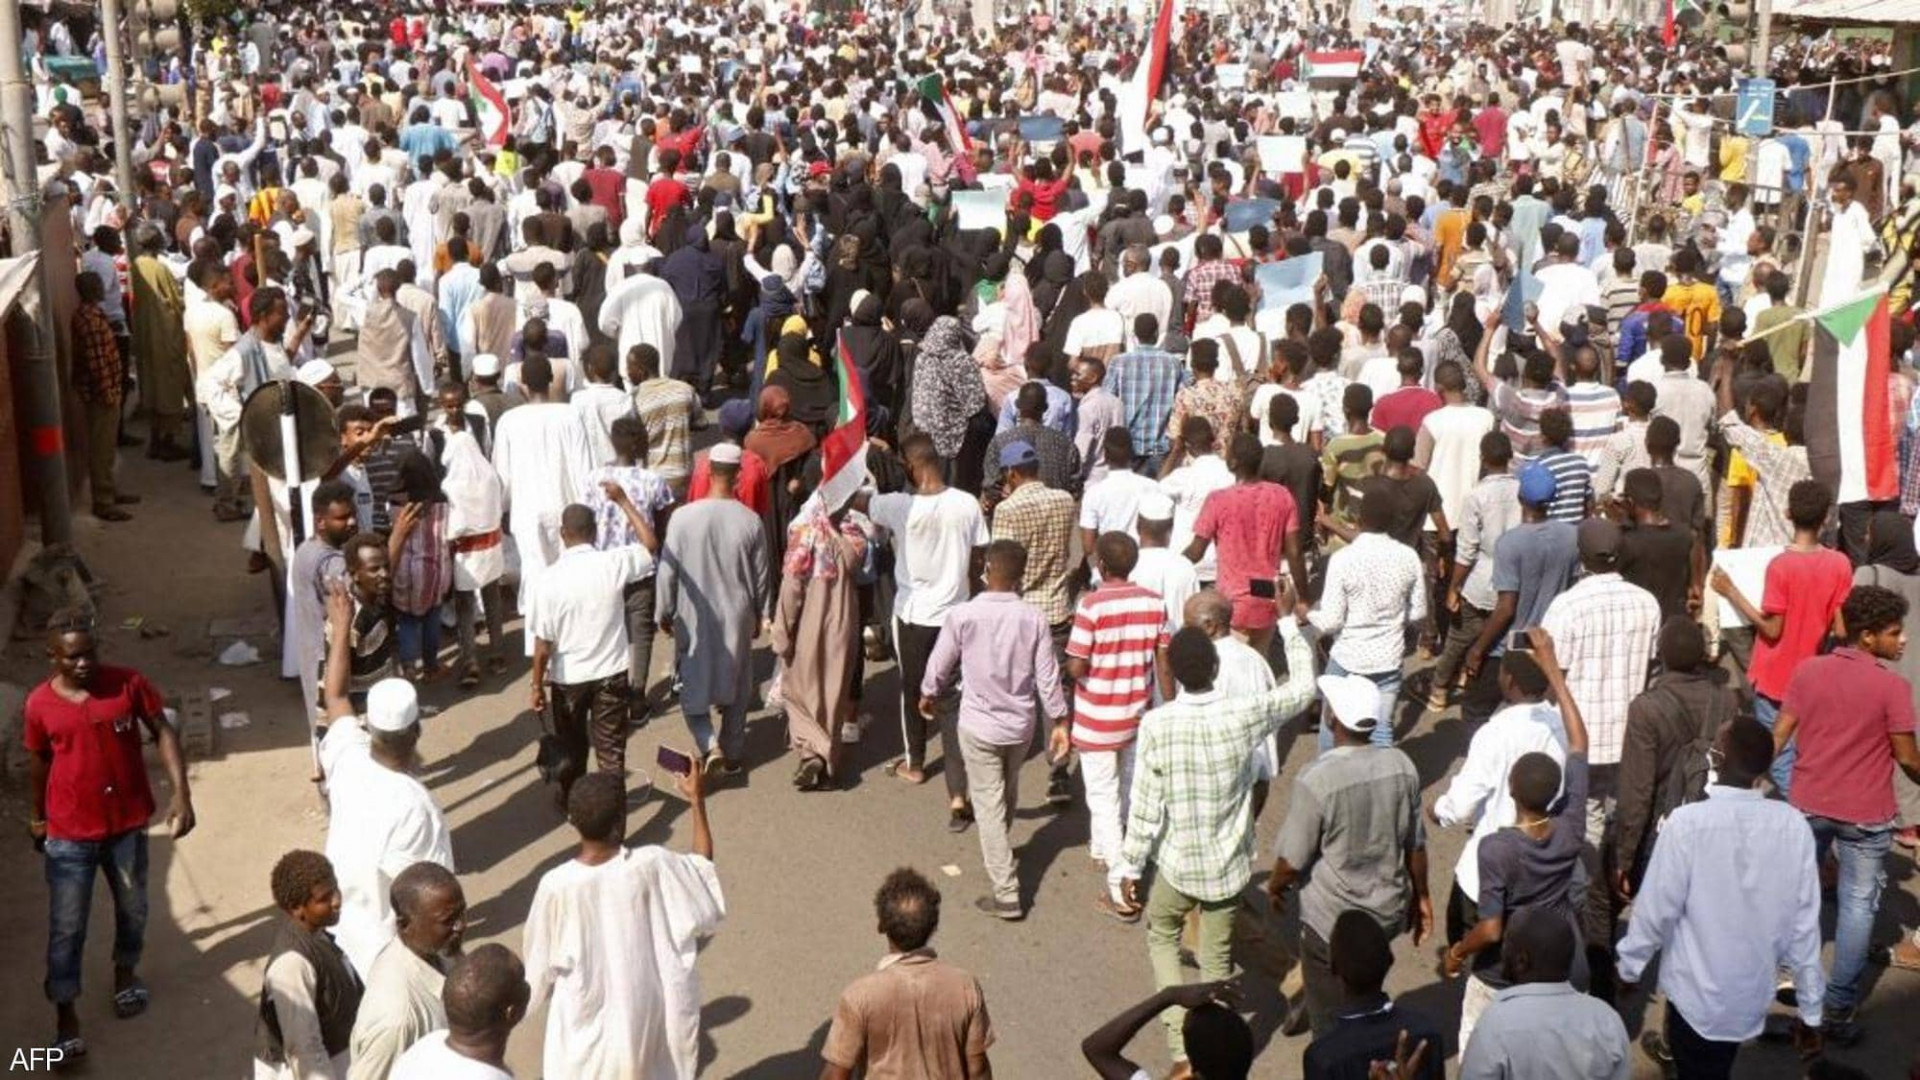 Sudan security forces shoot dead two protesters, doctors say